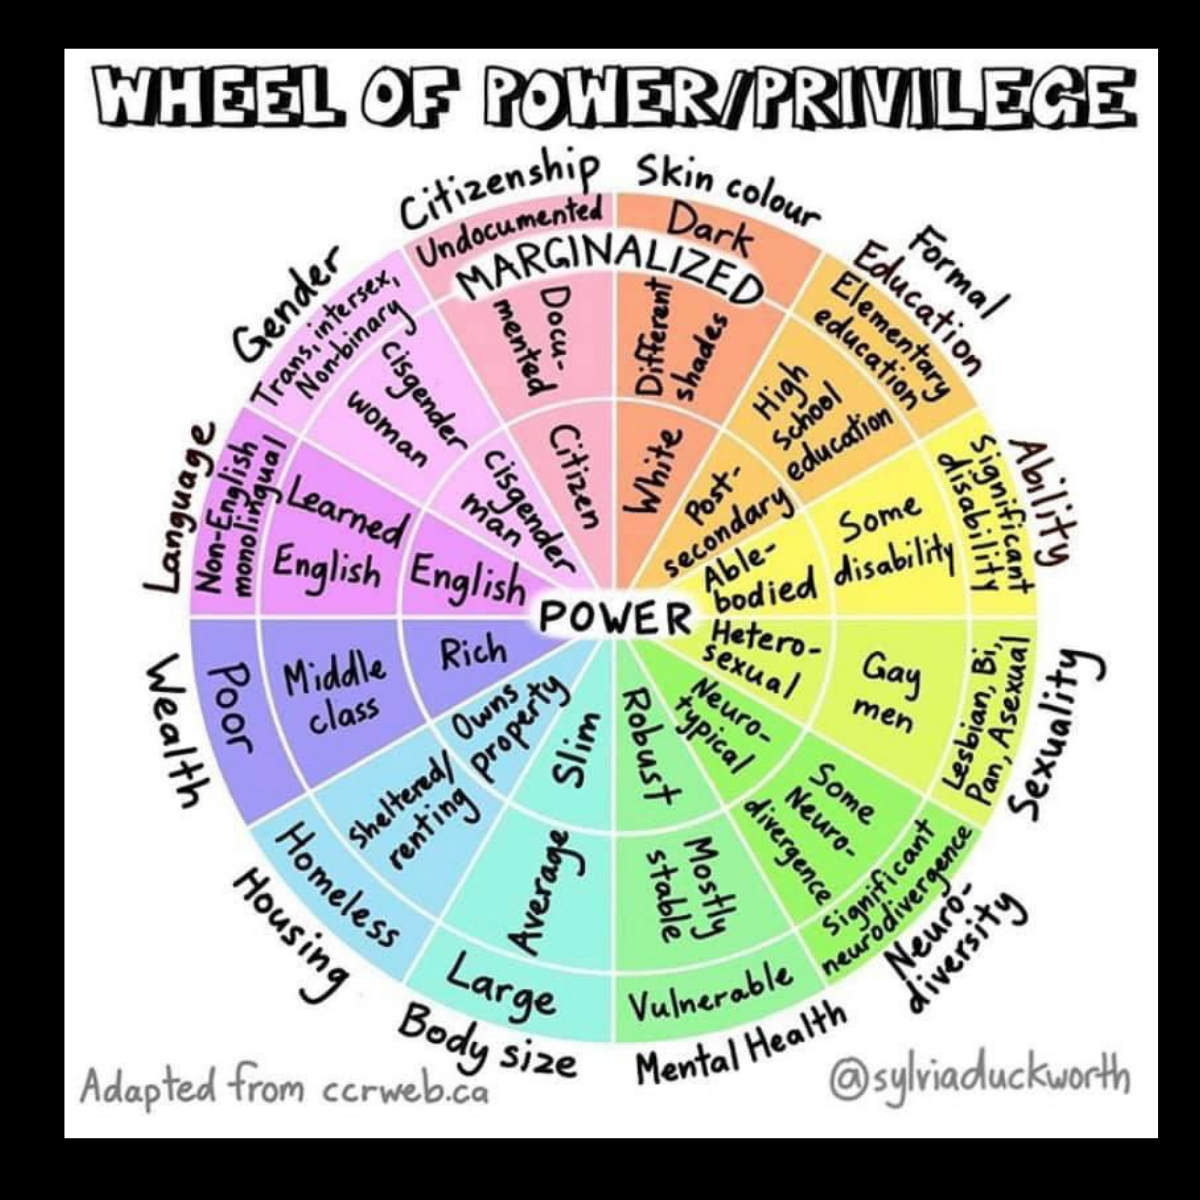 Wheel of power and privilege by Sylvia Duckworth